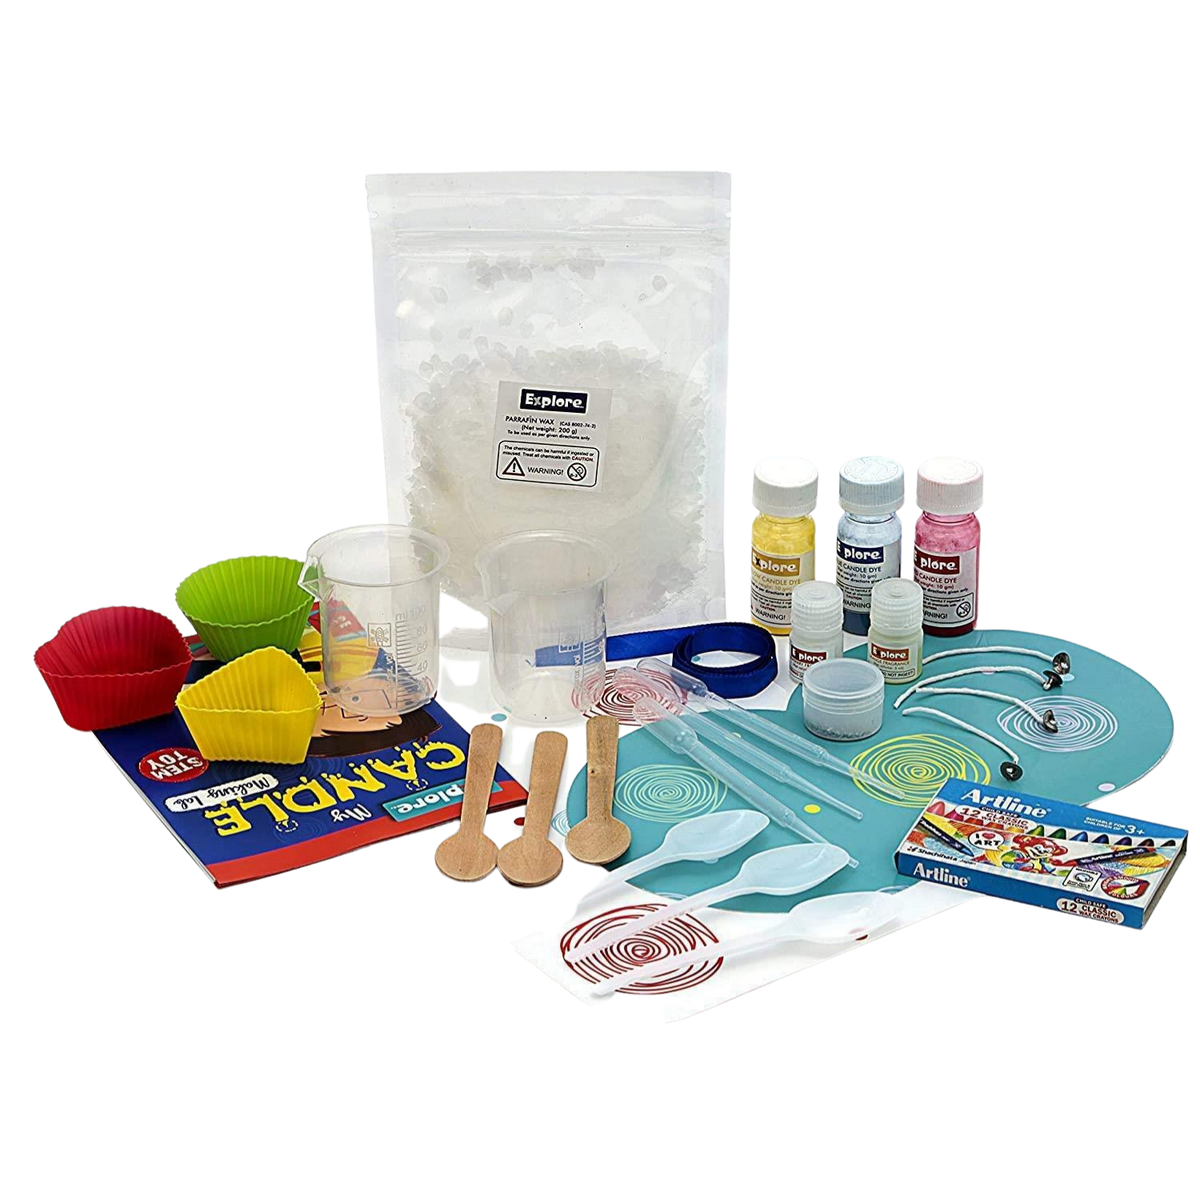 Science Gone Fun Clear Gel Candle Making Kit: 2 DIY Sets for Thoughtful  Friend and Gift-Giving